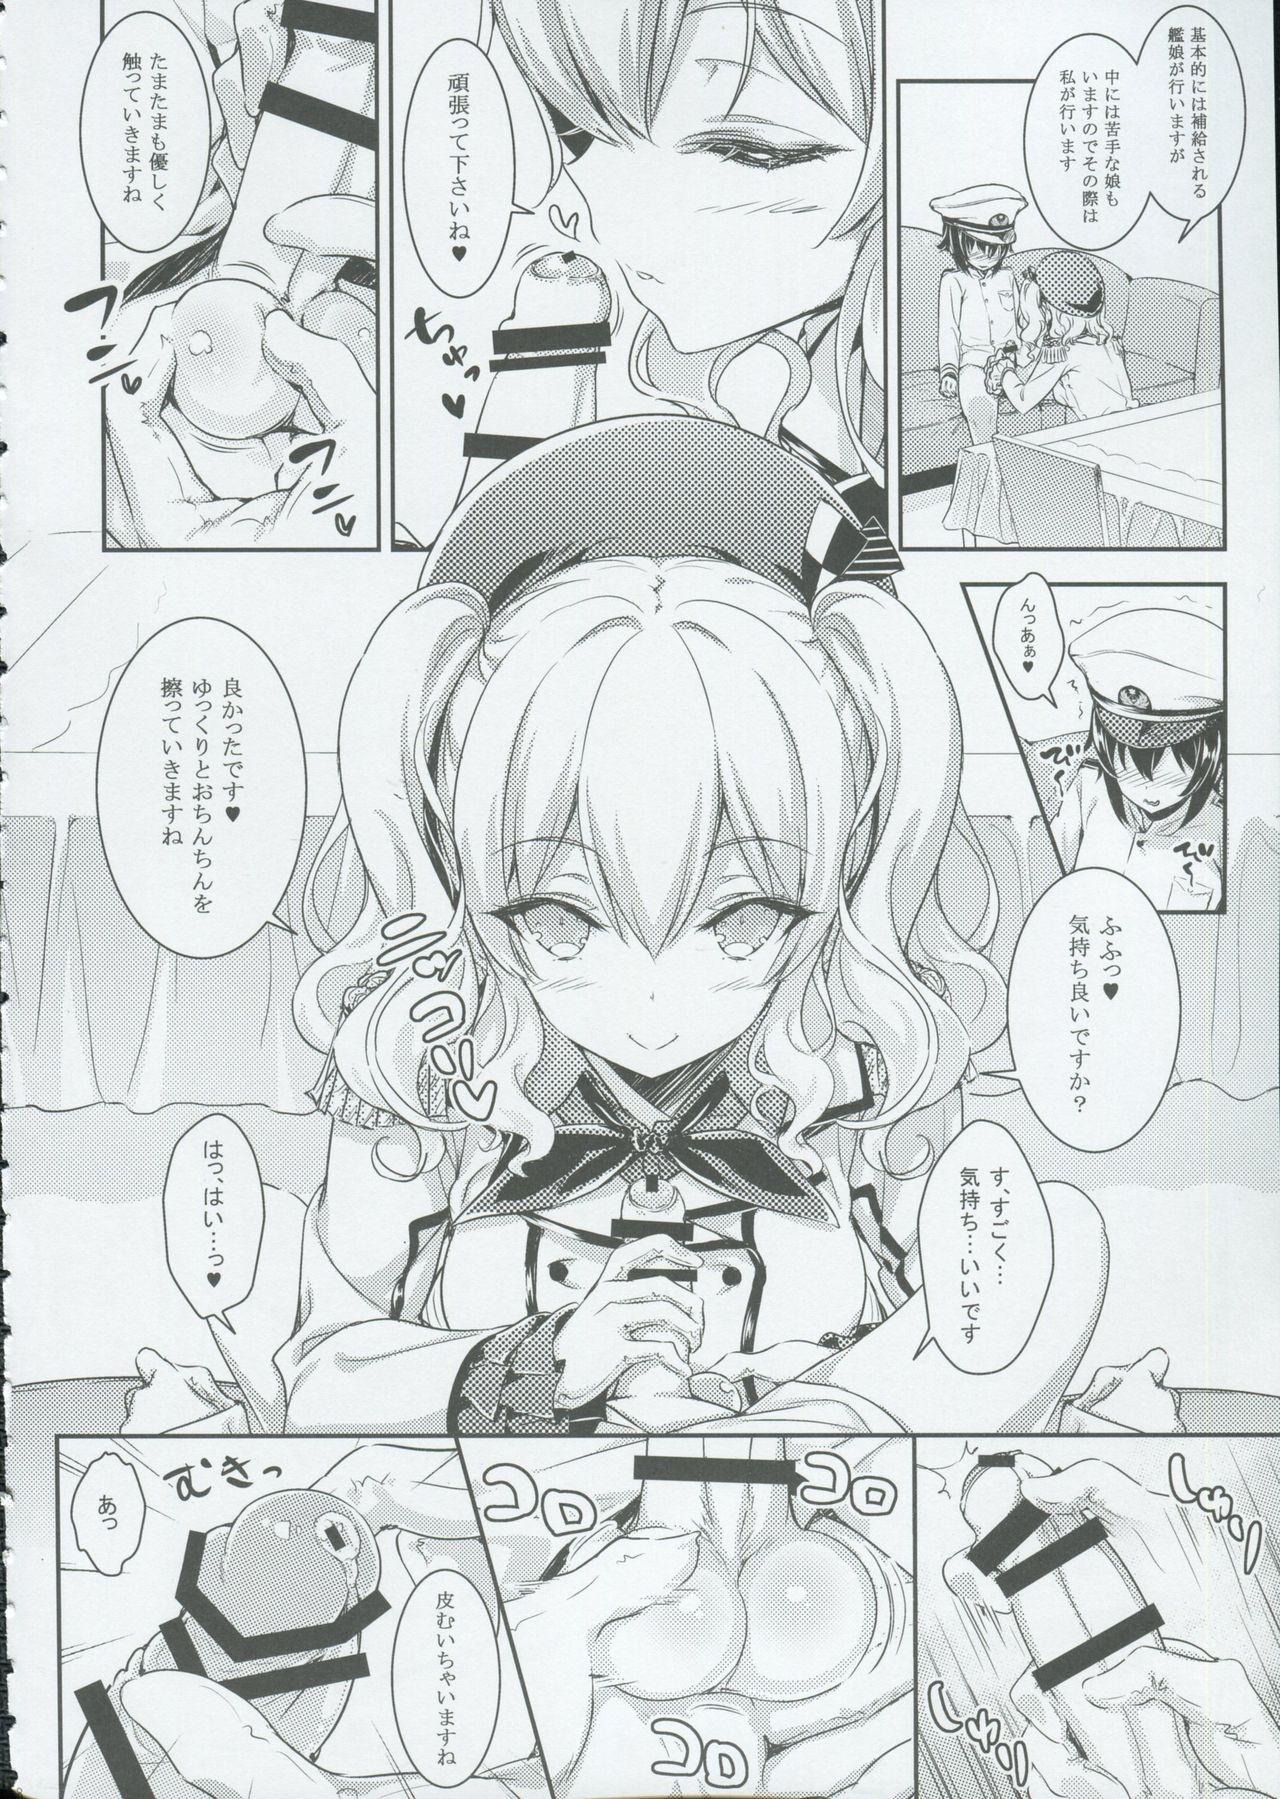 Adult Toys Let's Practice - Kantai collection Masturbating - Page 7